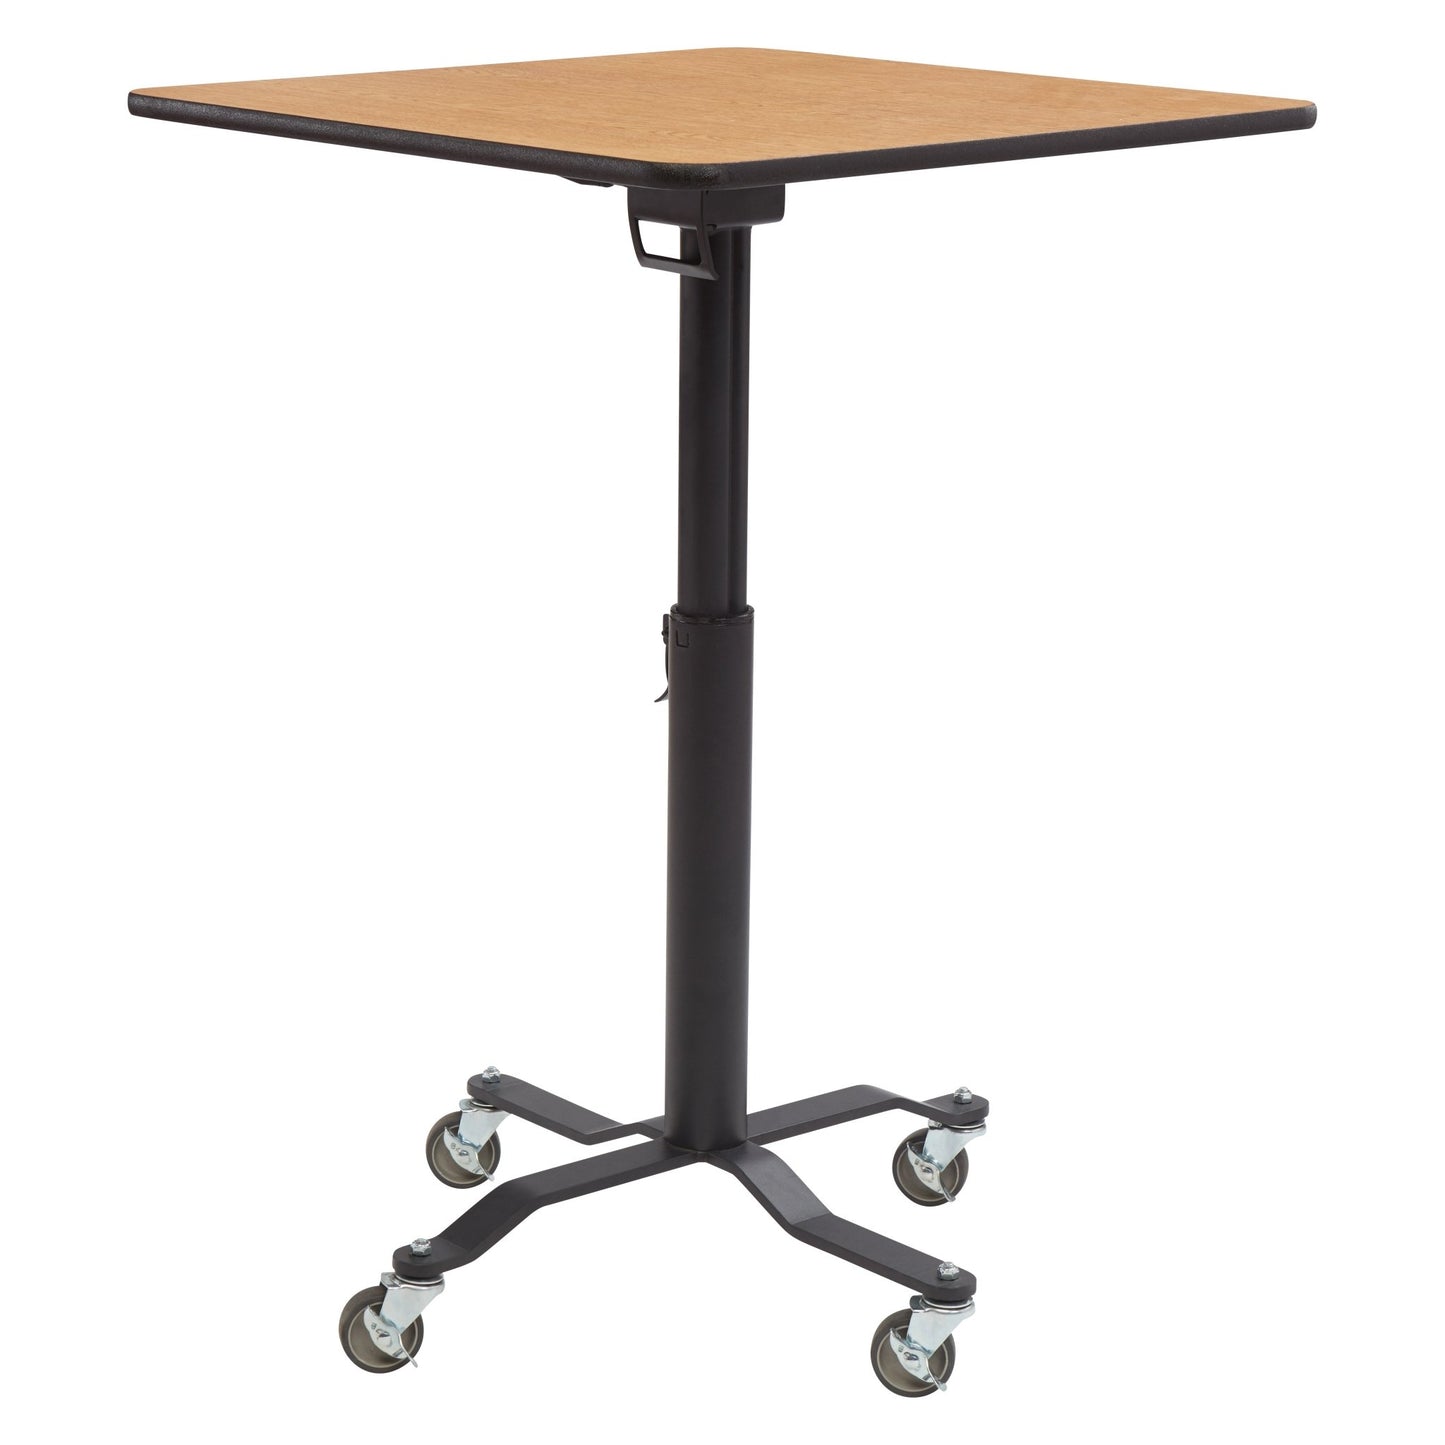 NPS Cafe Time II Table, 30" Square, High Pressure Laminate Top, MDF Core, Protect Edge (NationalPublic Seating NPS-PCT330MDPE) - SchoolOutlet